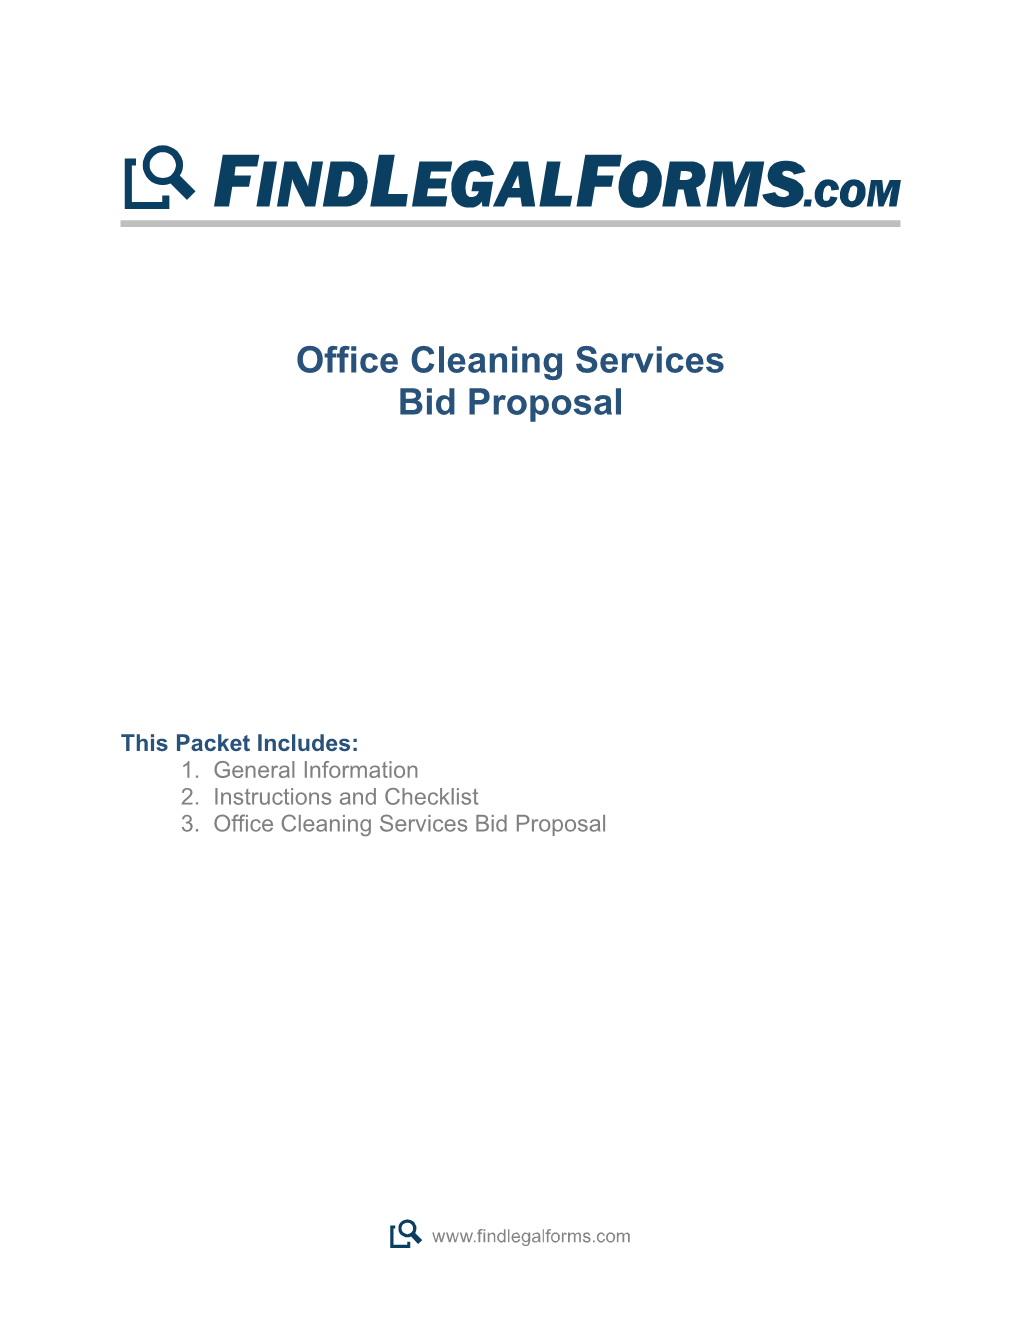 Office Cleaning Services Bid Proposal